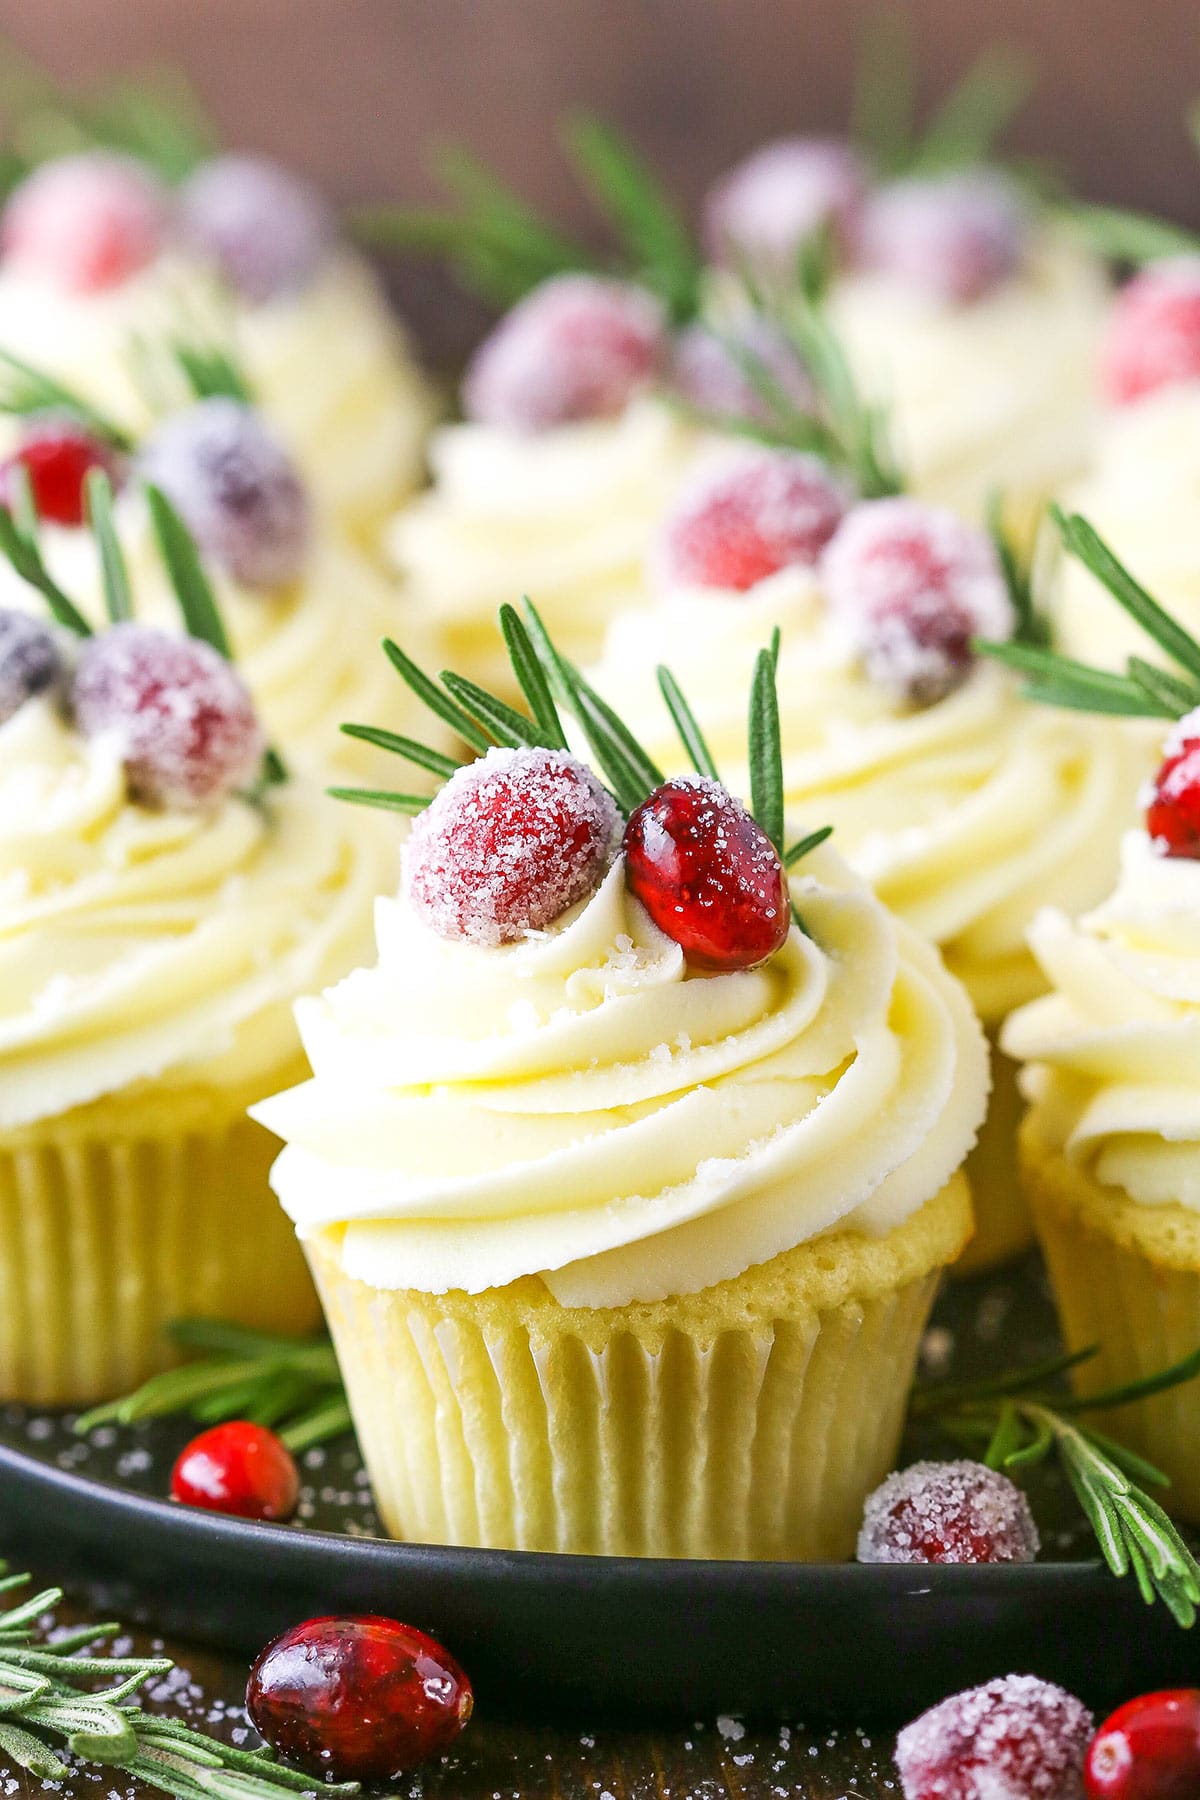 A serving platter full of cranberry white chocolate cupcakes garnished with sparkling cranberries and rosemary